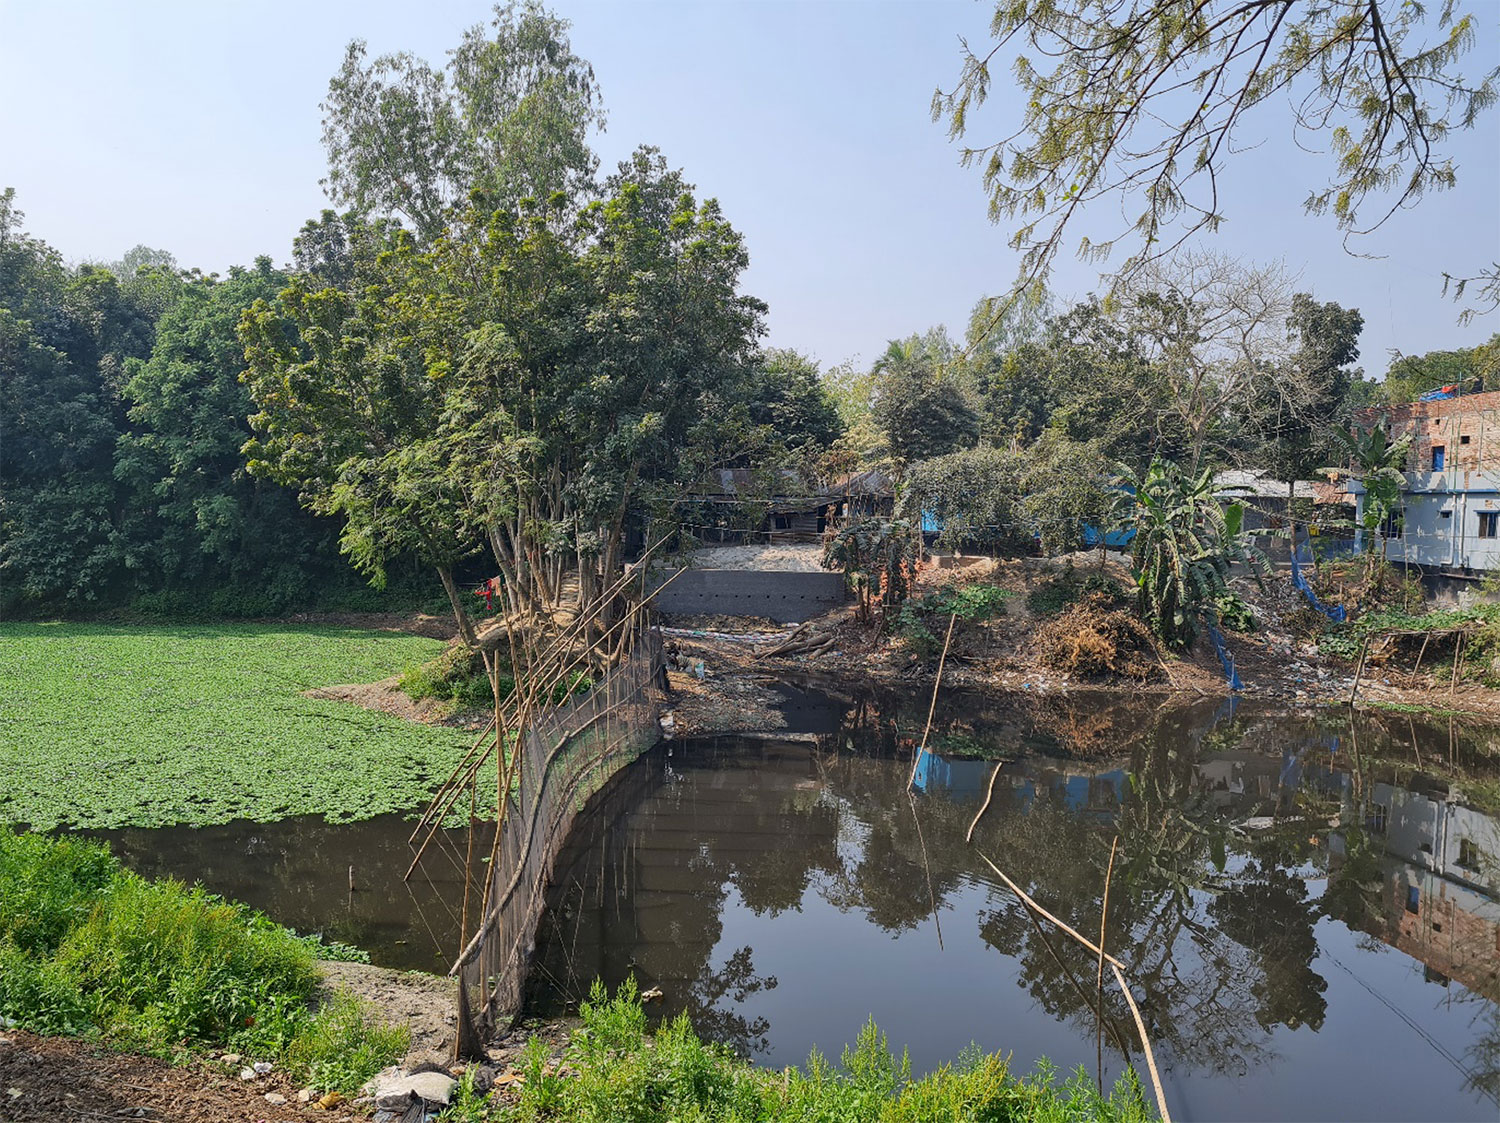 The site chosen for implementation along the Katakhali Channel